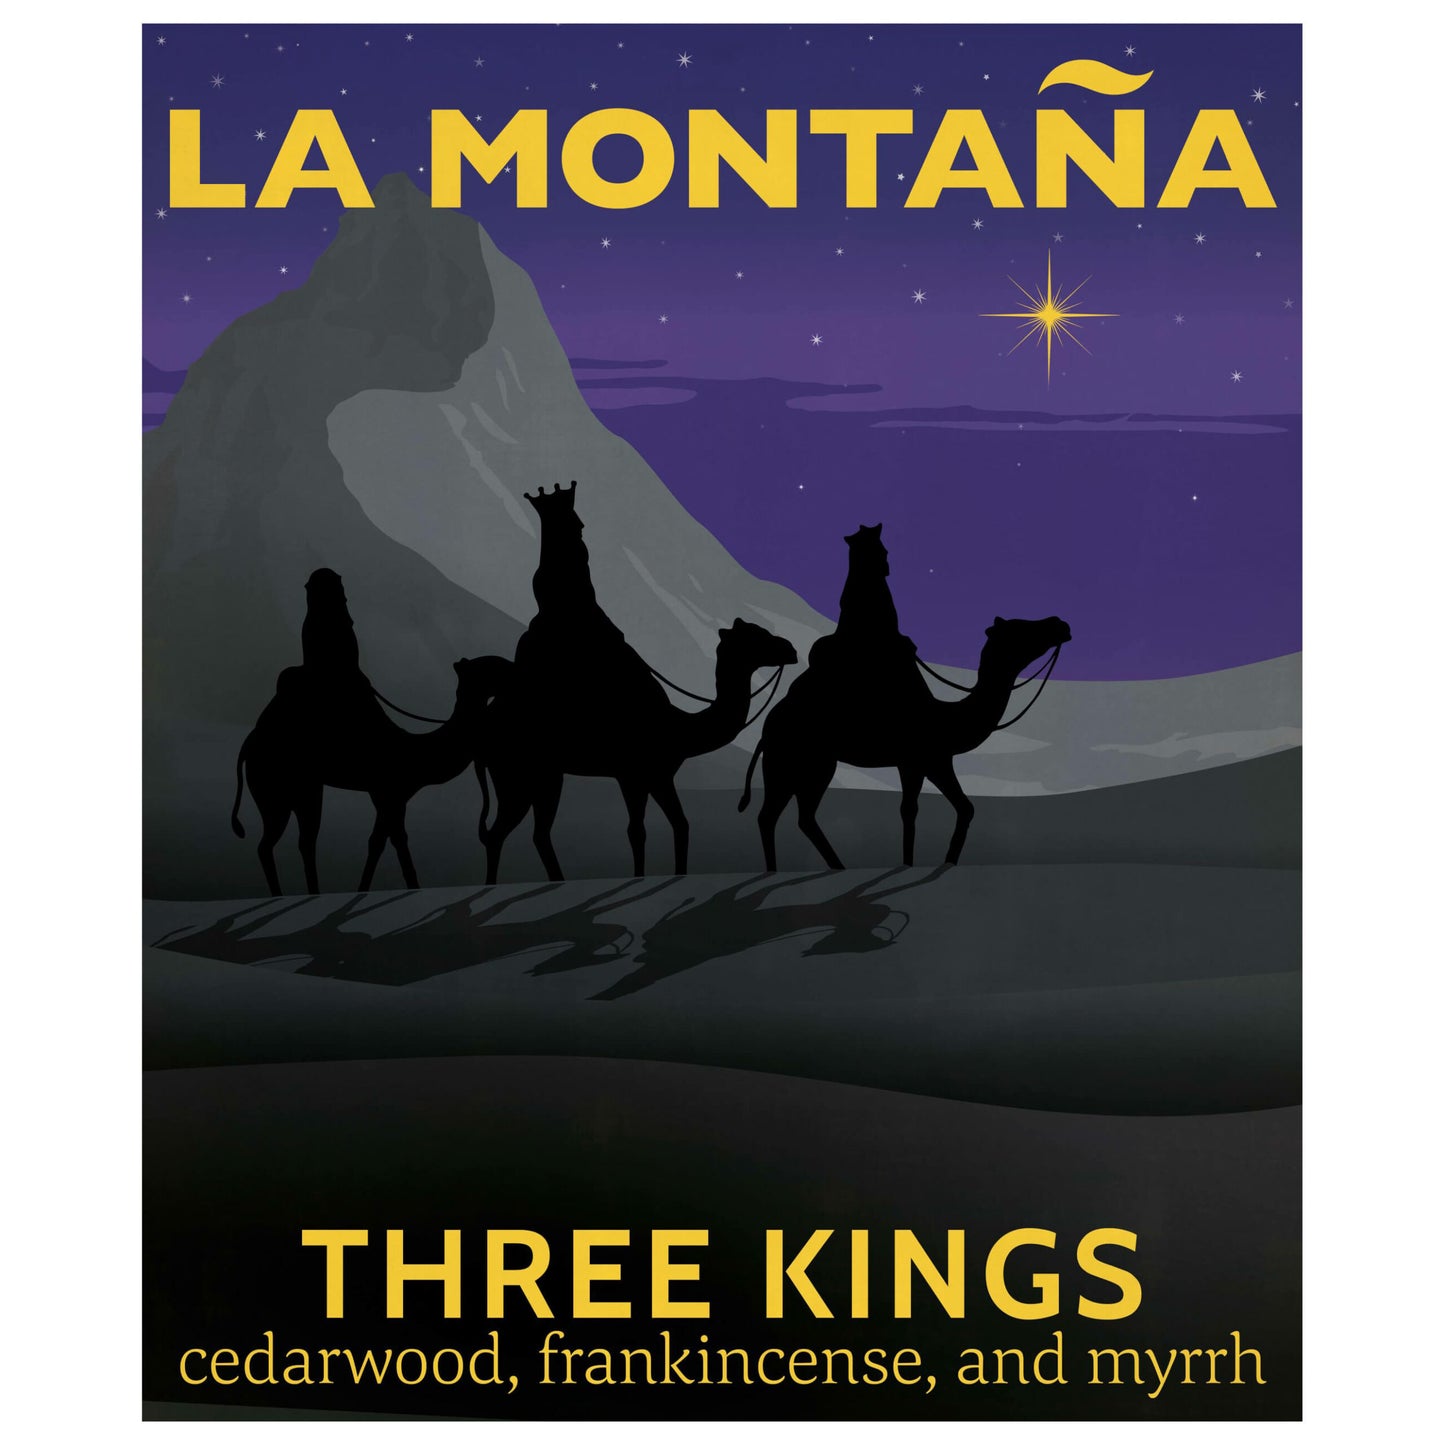 La Montaña Three Kings Scented Candle - Osmology Scented Candles & Home Fragrance